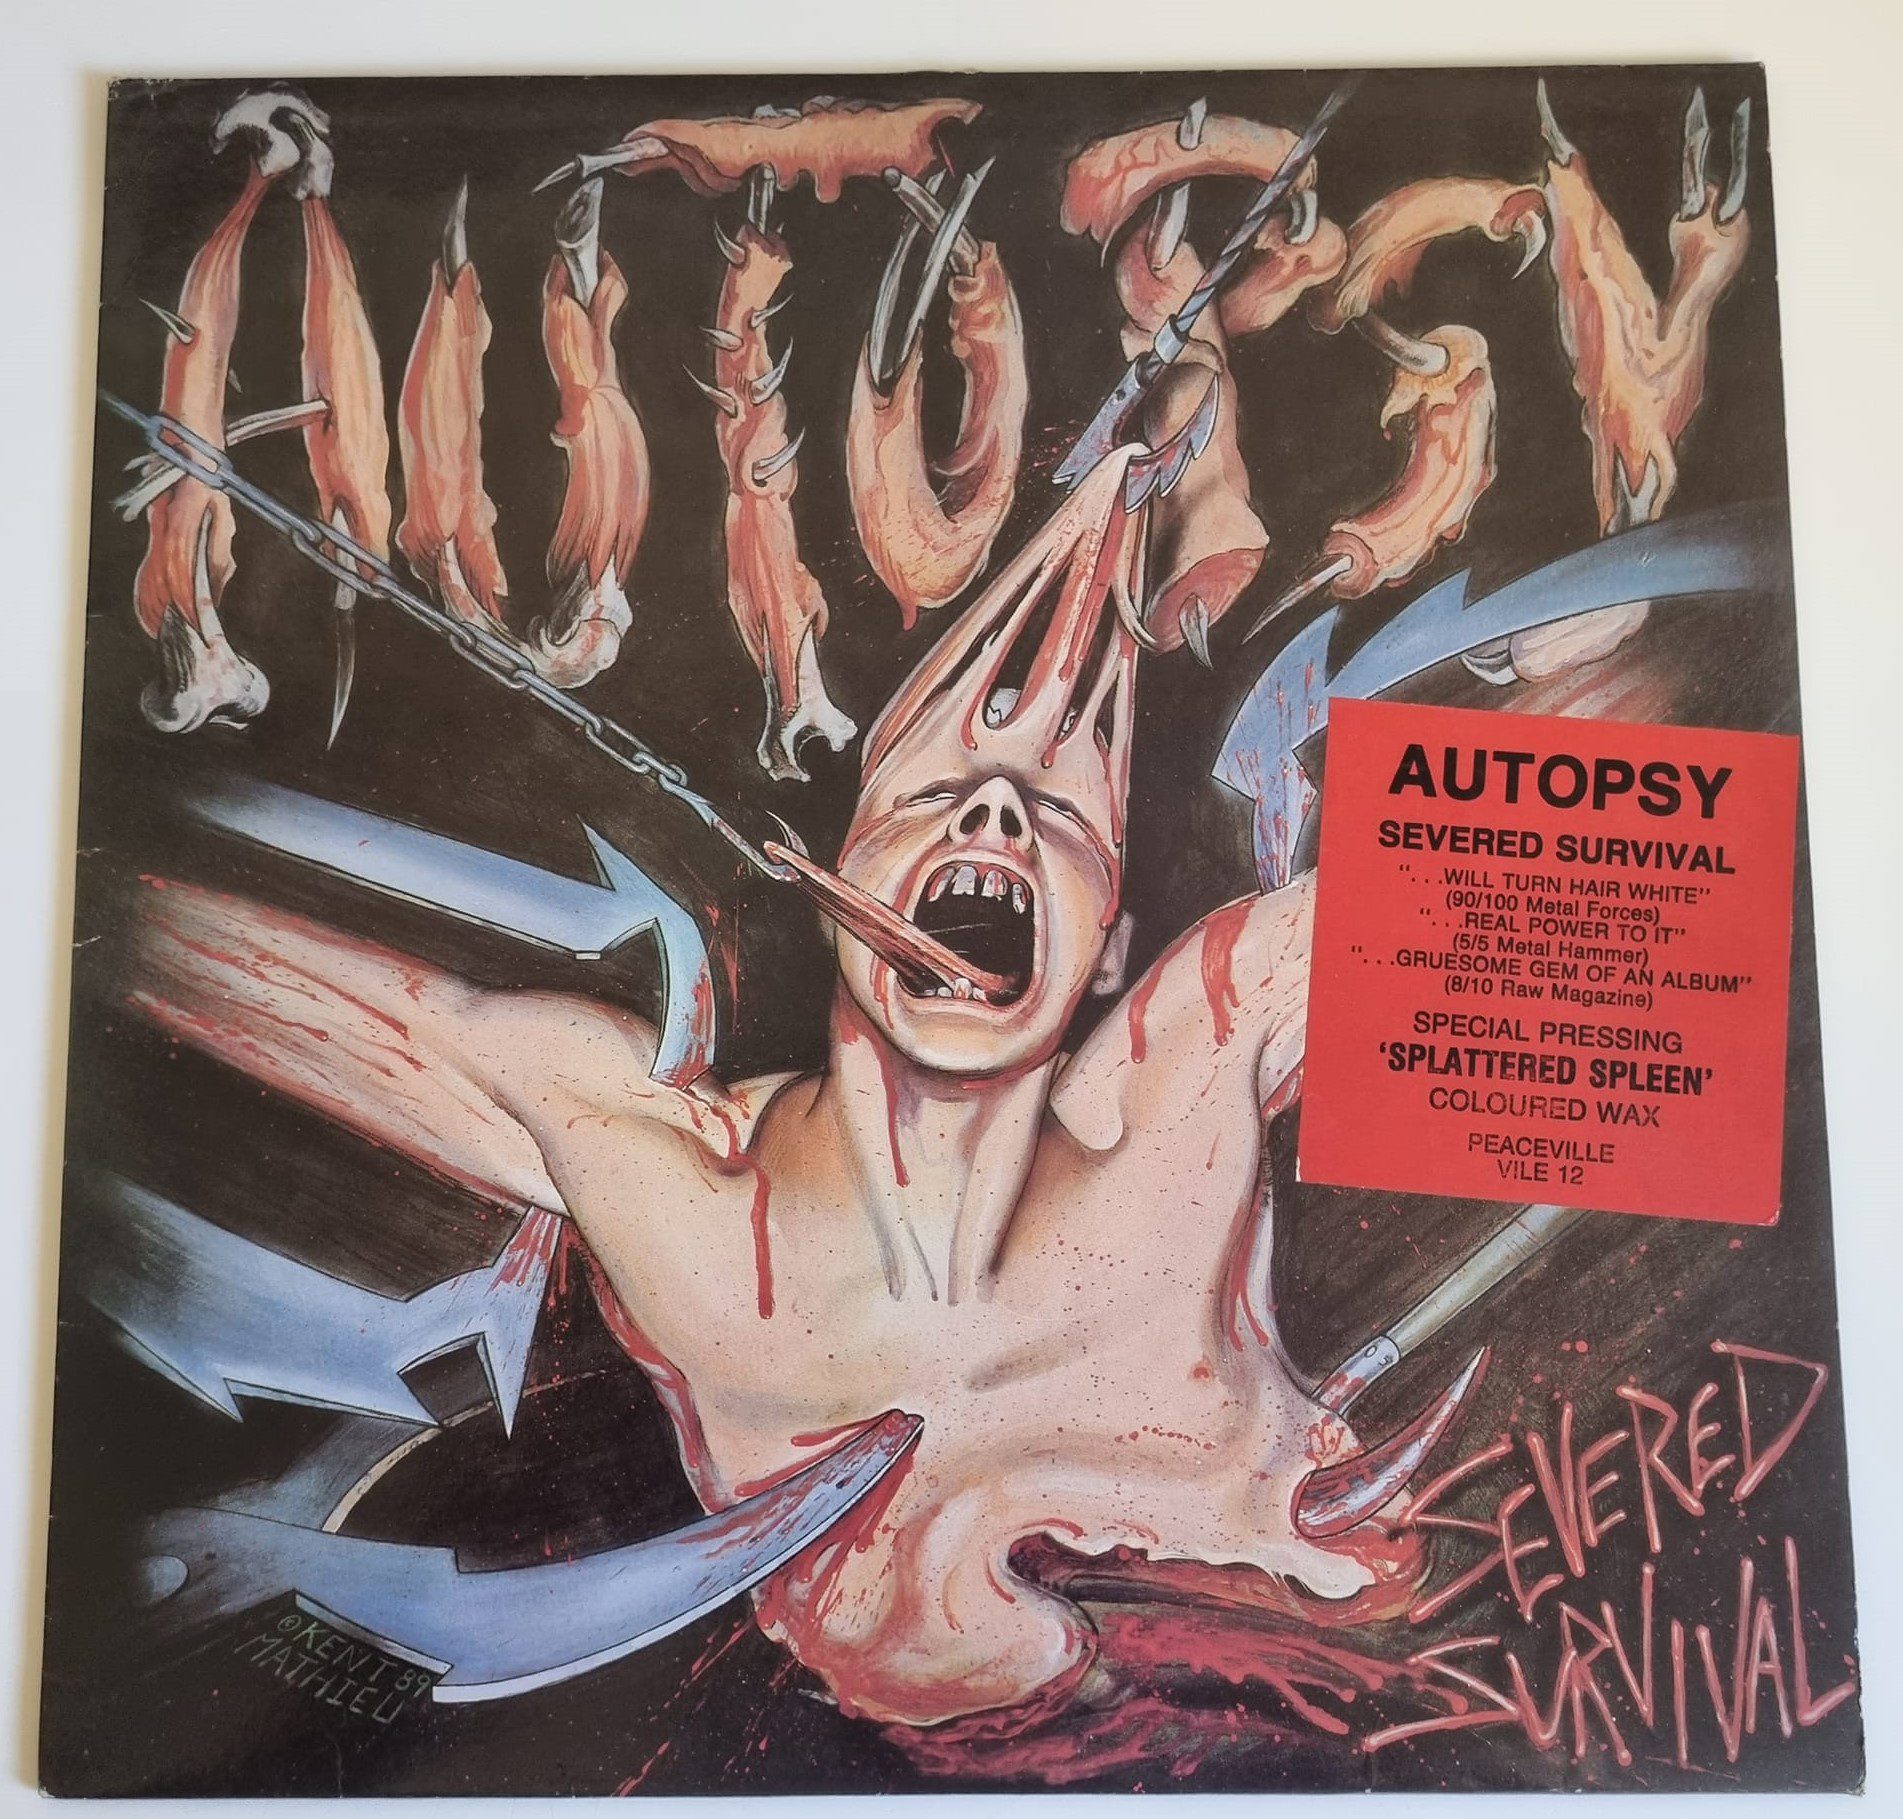 Buy this rare Autopsy record by clicking here